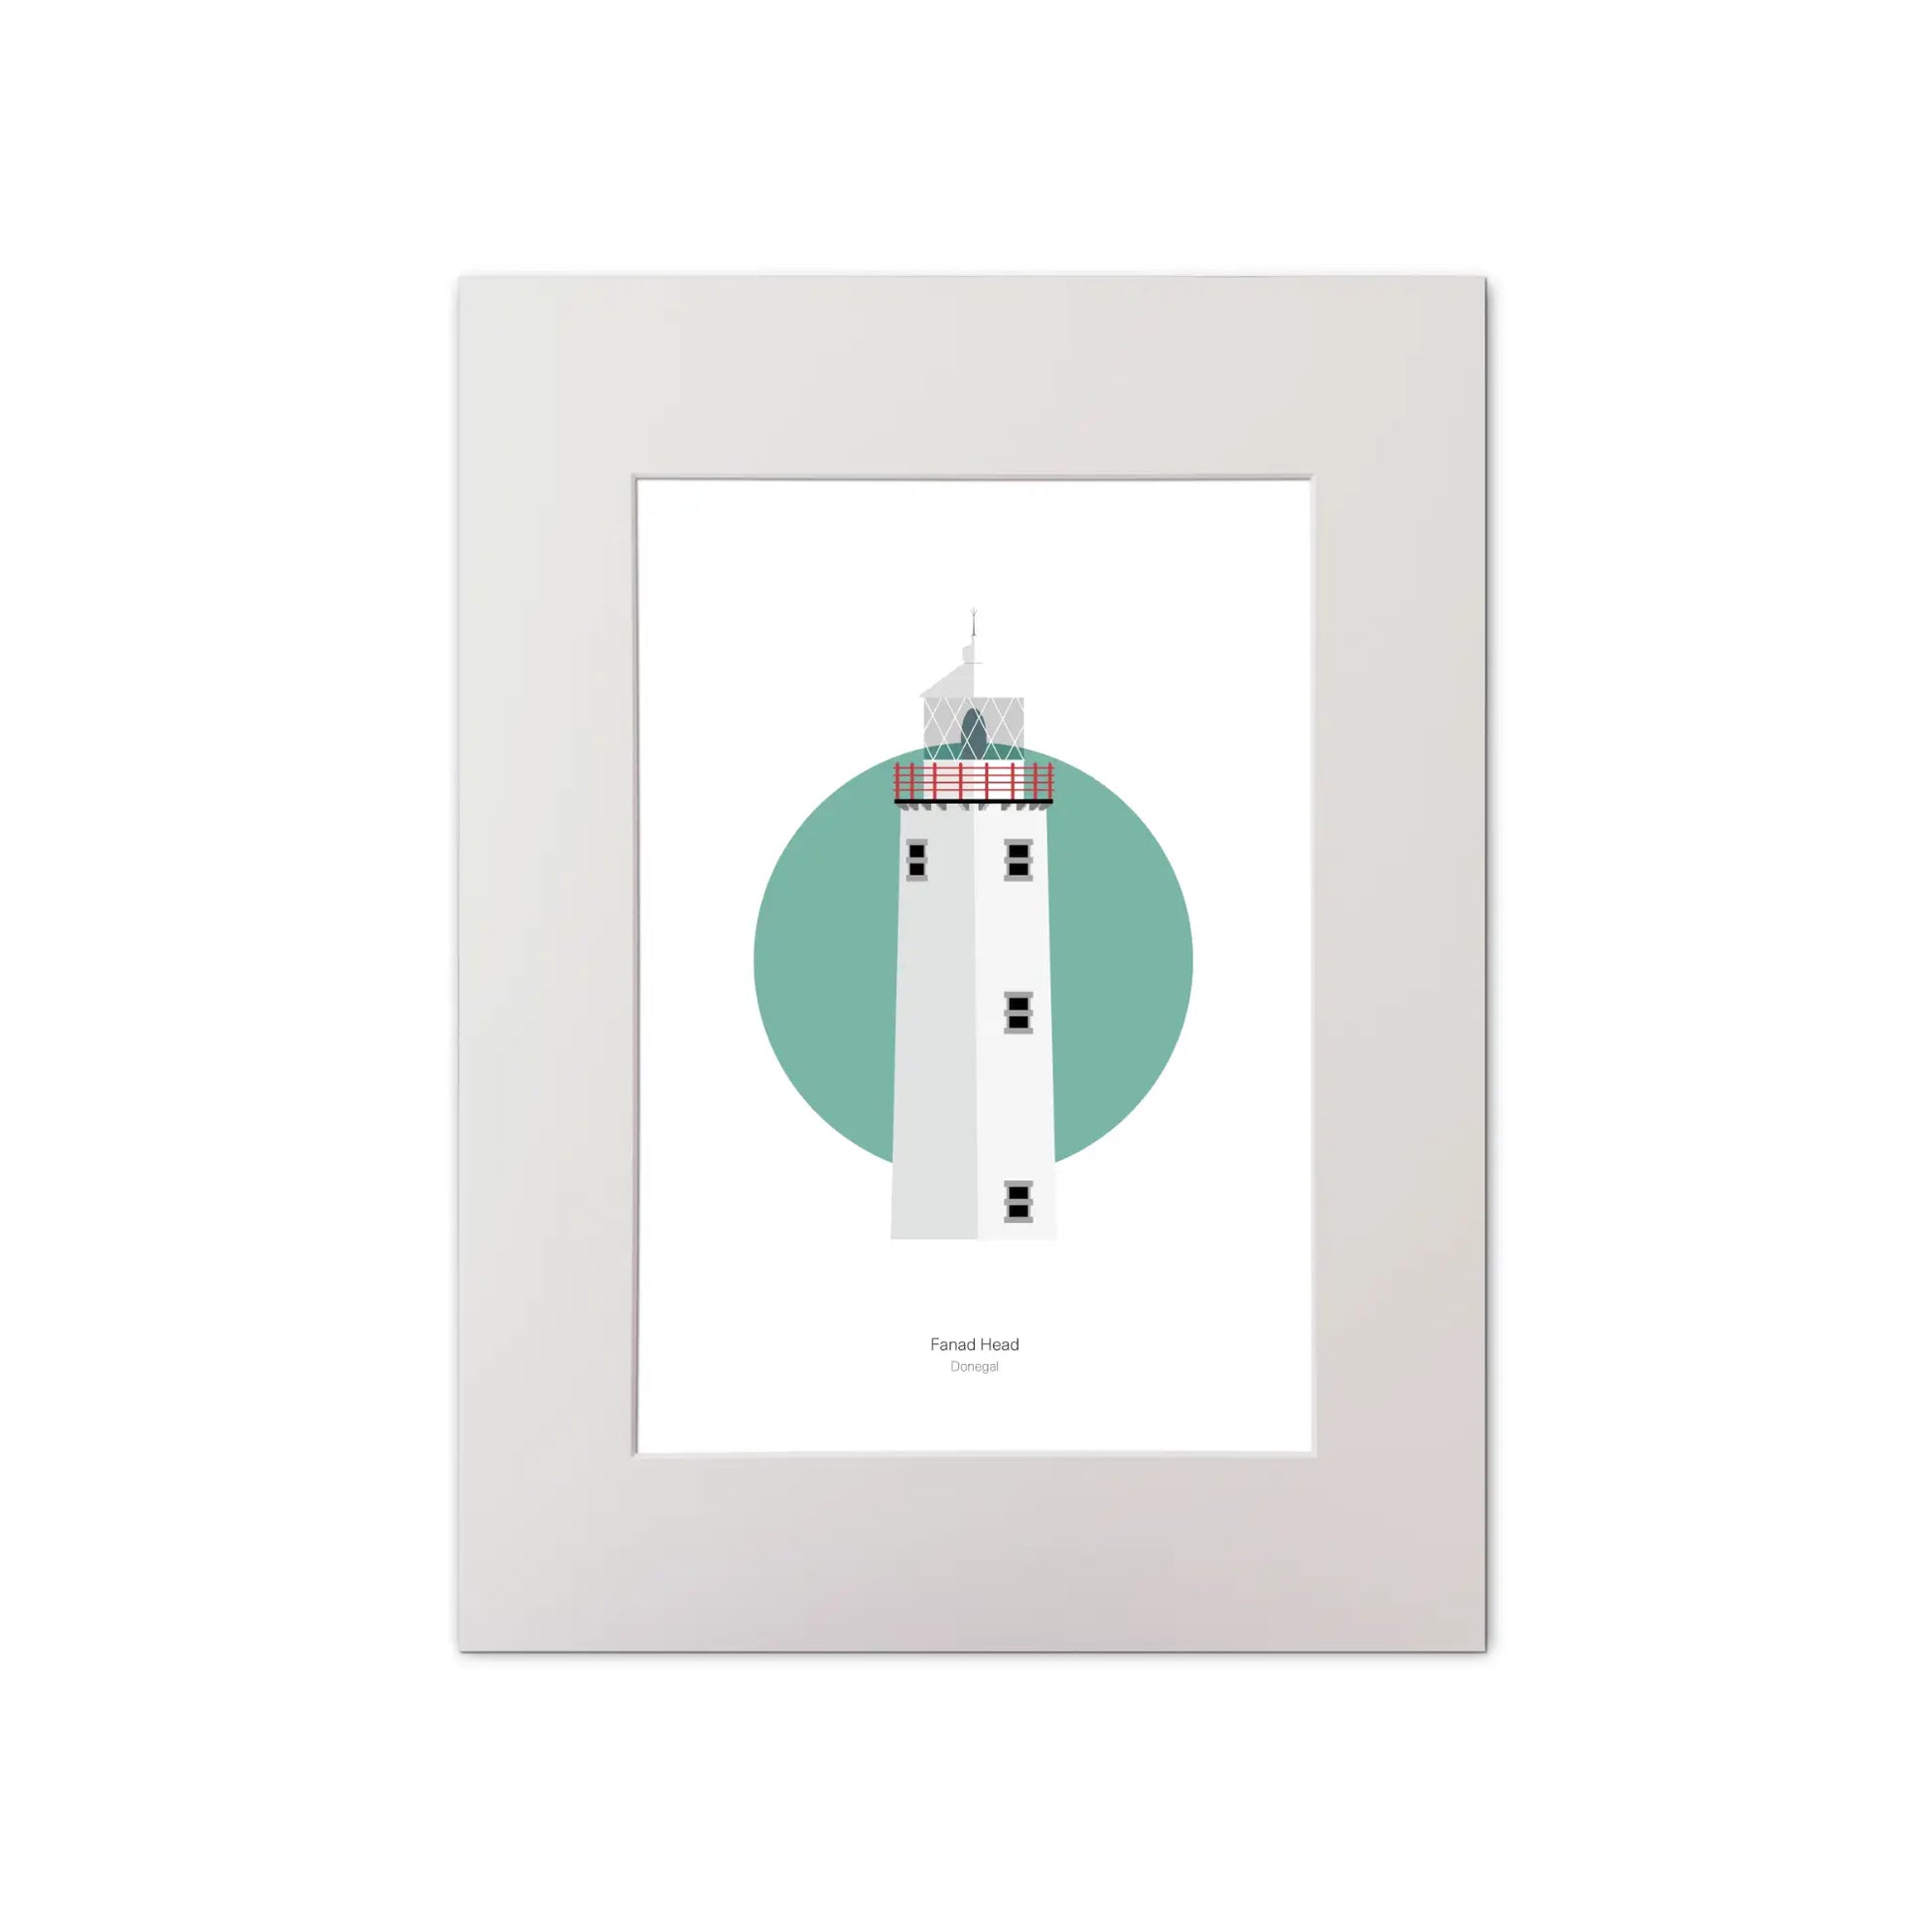 Illustration of Fanad Head lighthouse on a white background inside light blue square, mounted and measuring 30x40cm.